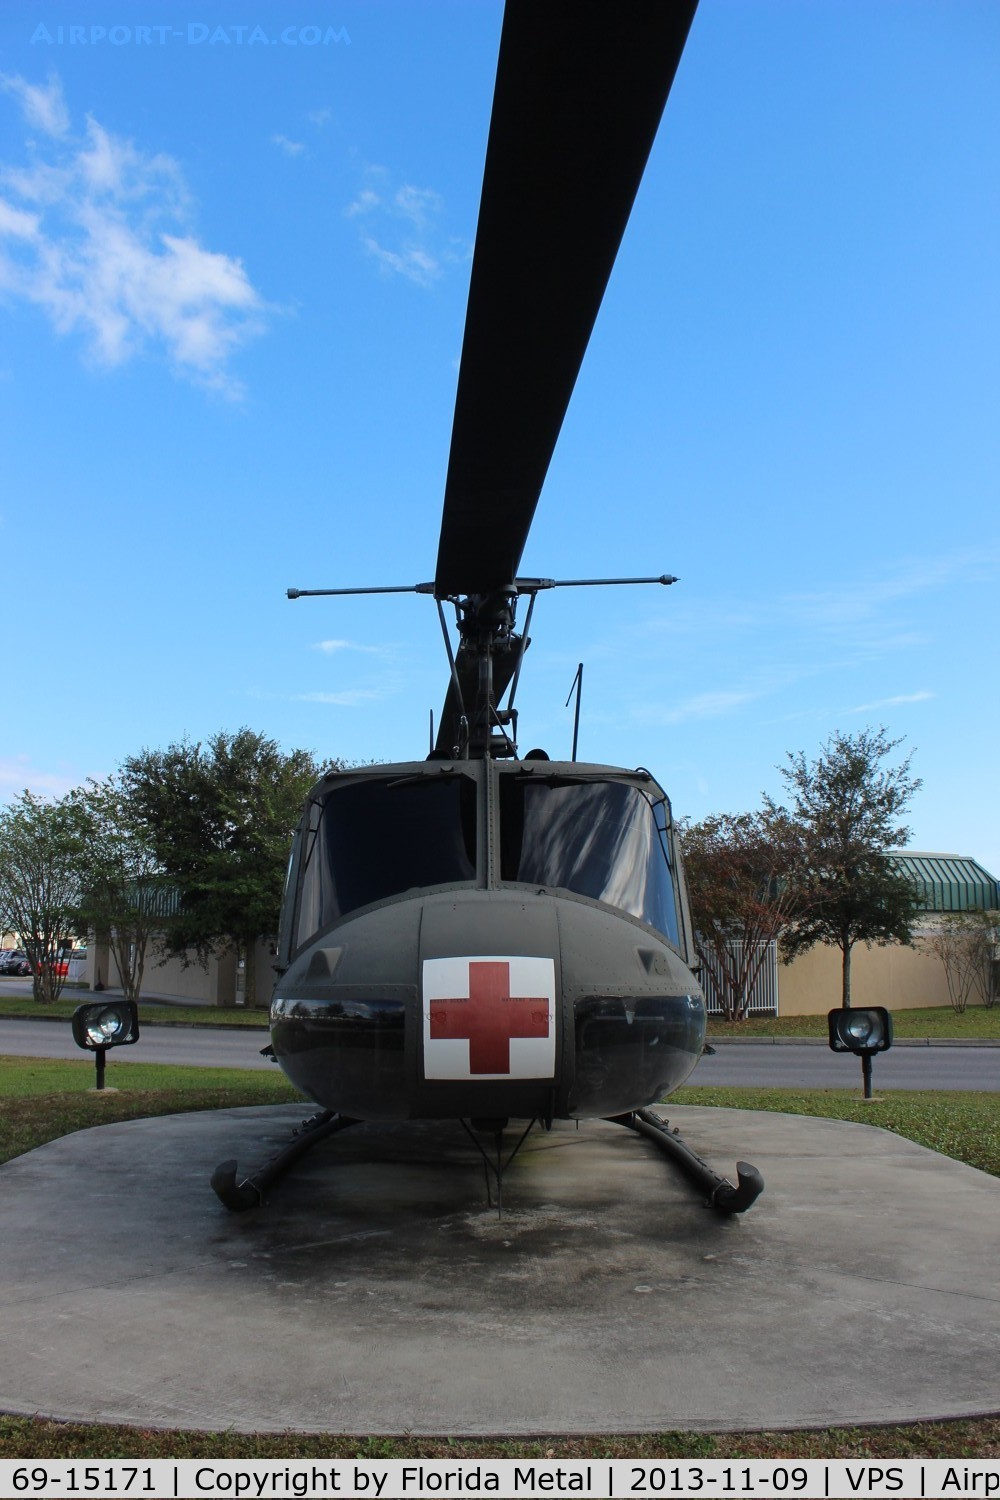 69-15171, 1969 Bell UH-1H Iroquois C/N 11459, UH-1H